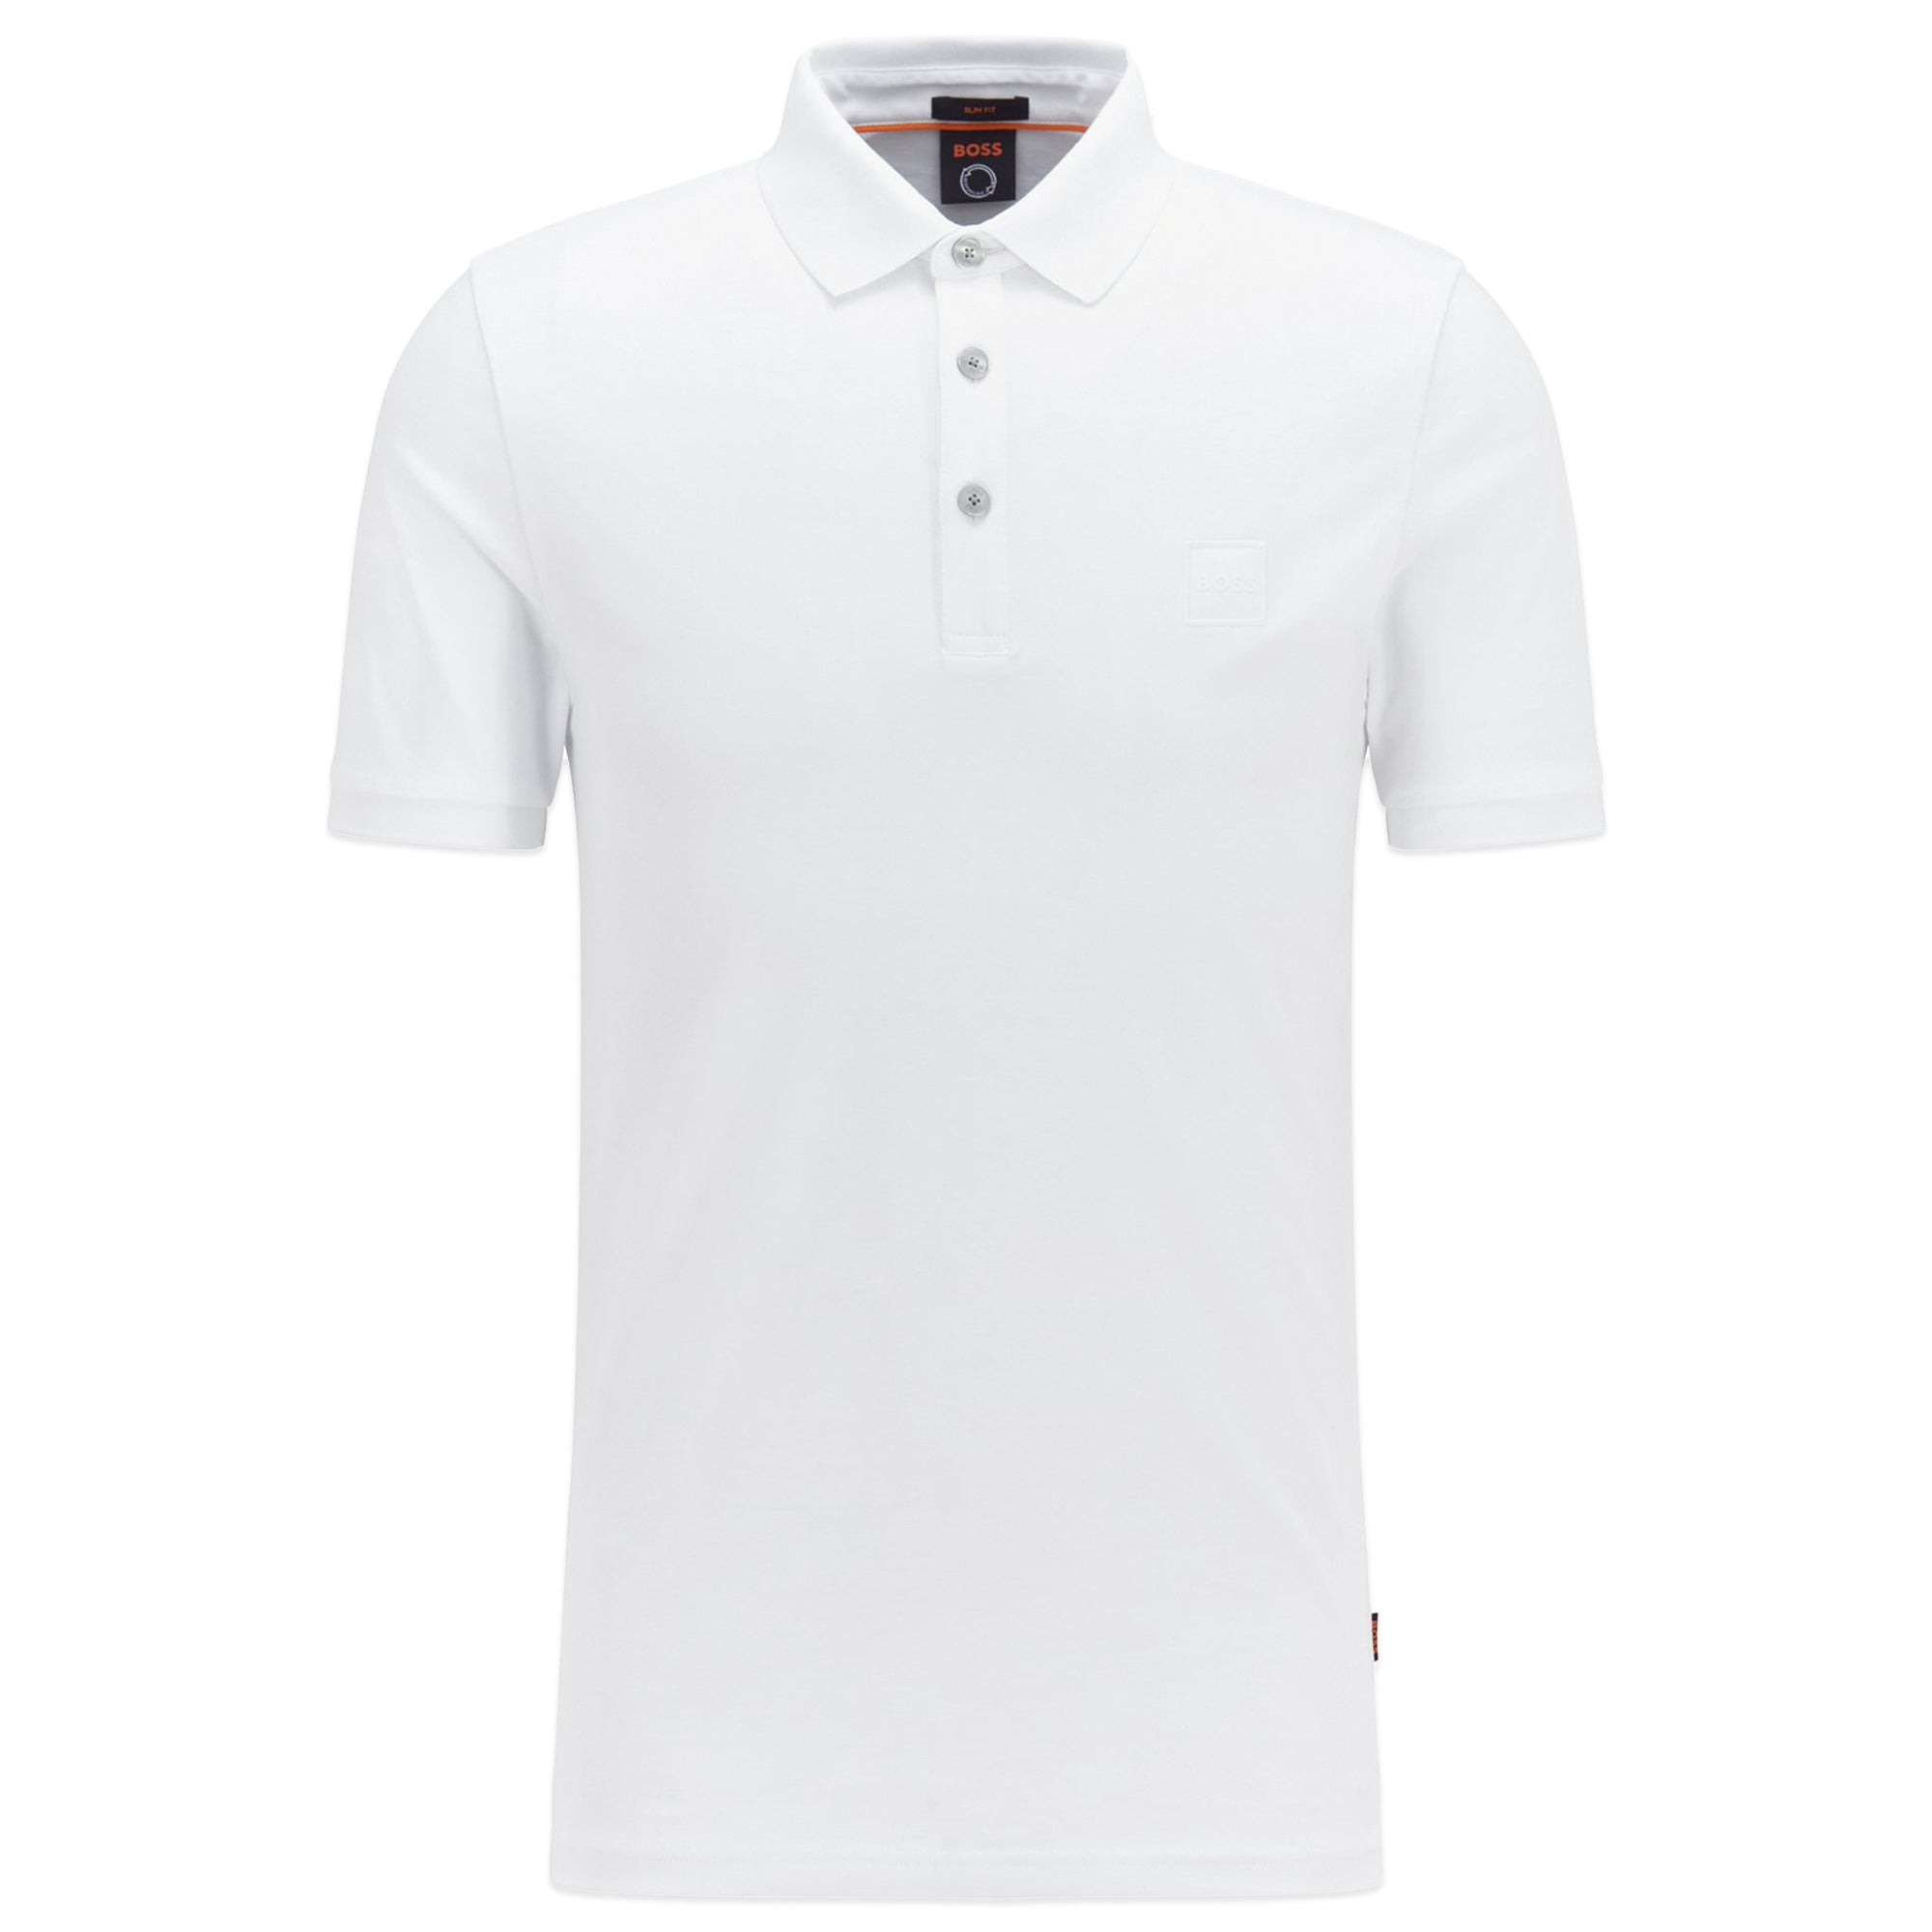 Long 1 Passerby Polo Boss White - Sleeve